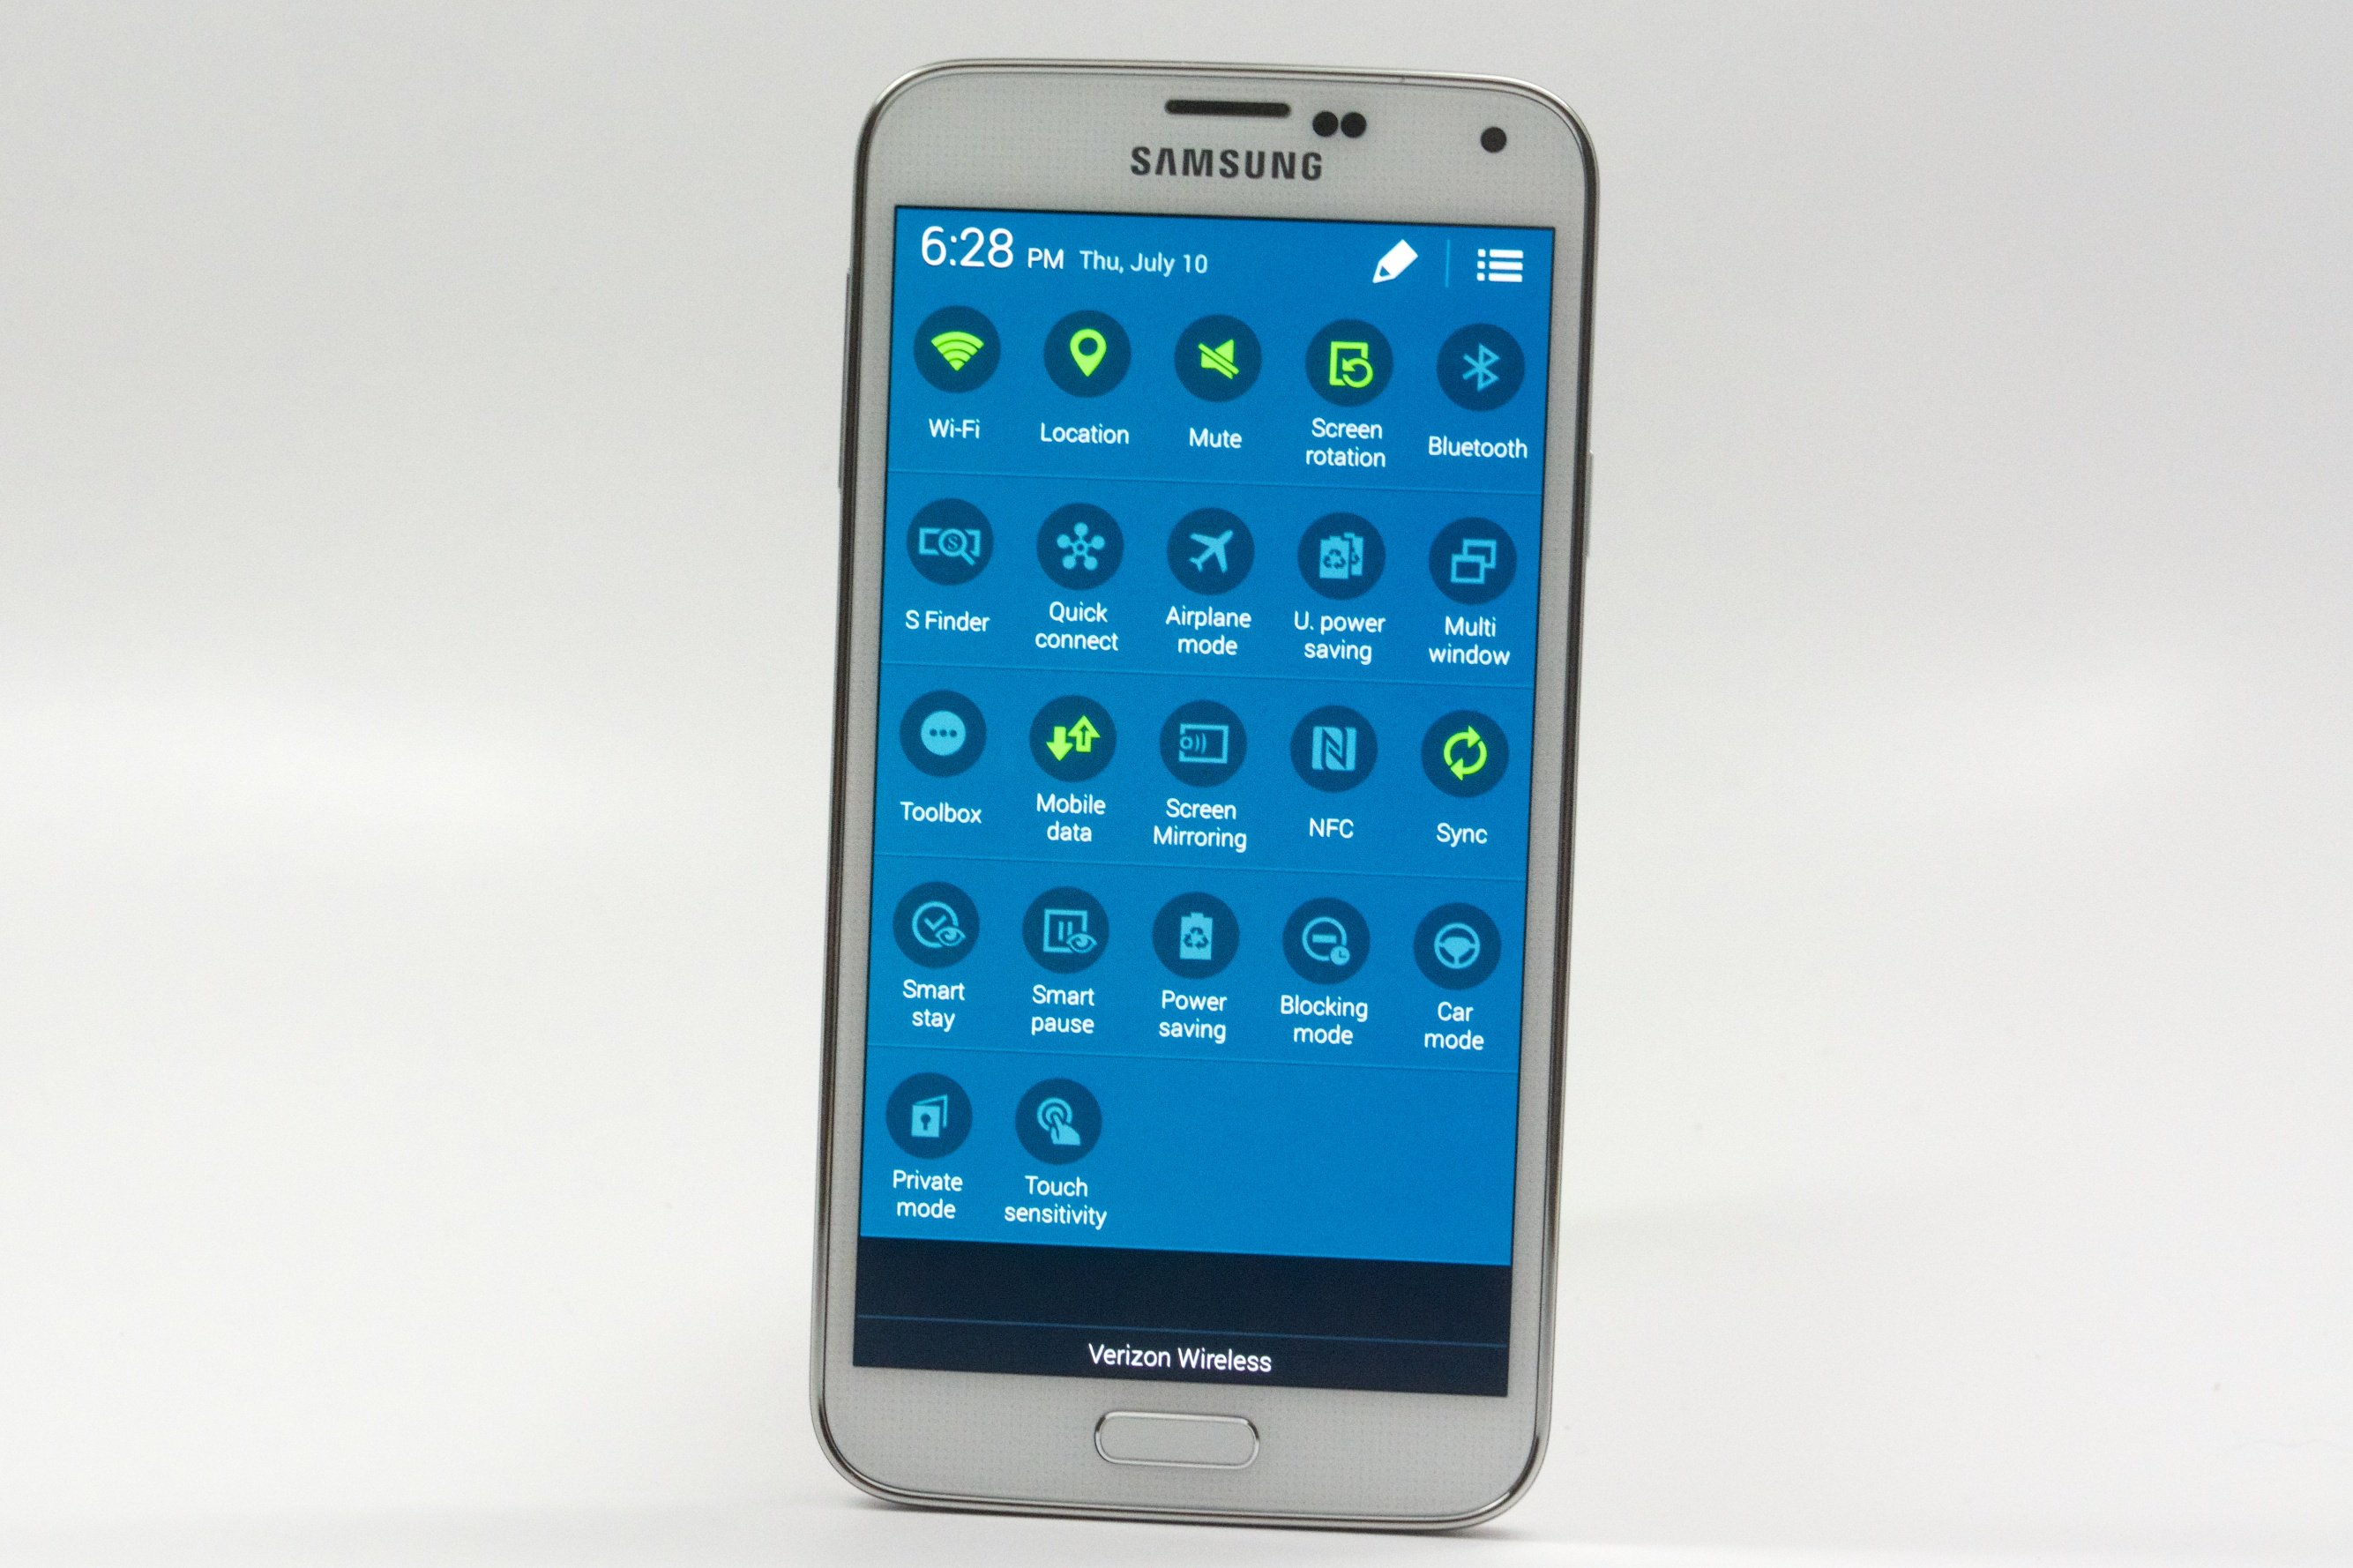 Samsung includes many small changes to basic Android 4.4.2 design with the Galaxy S5.